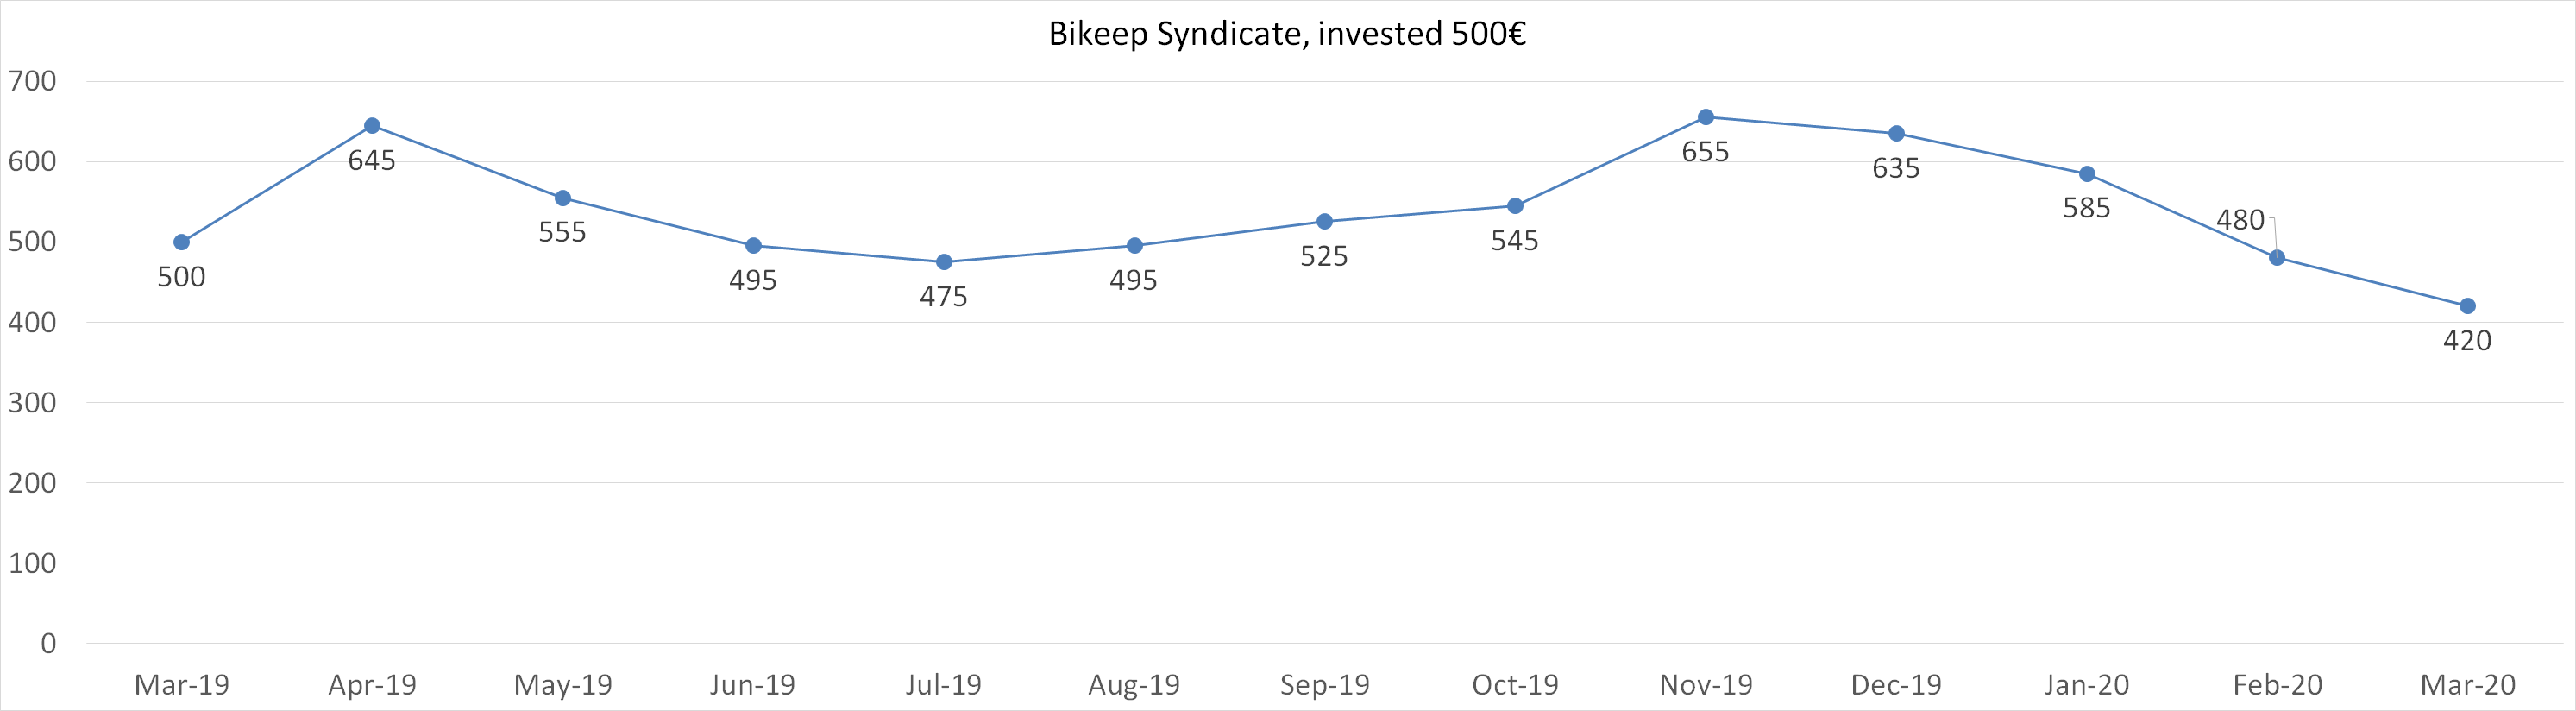 Bikeep syndicate, invested 500 worth in march 2020